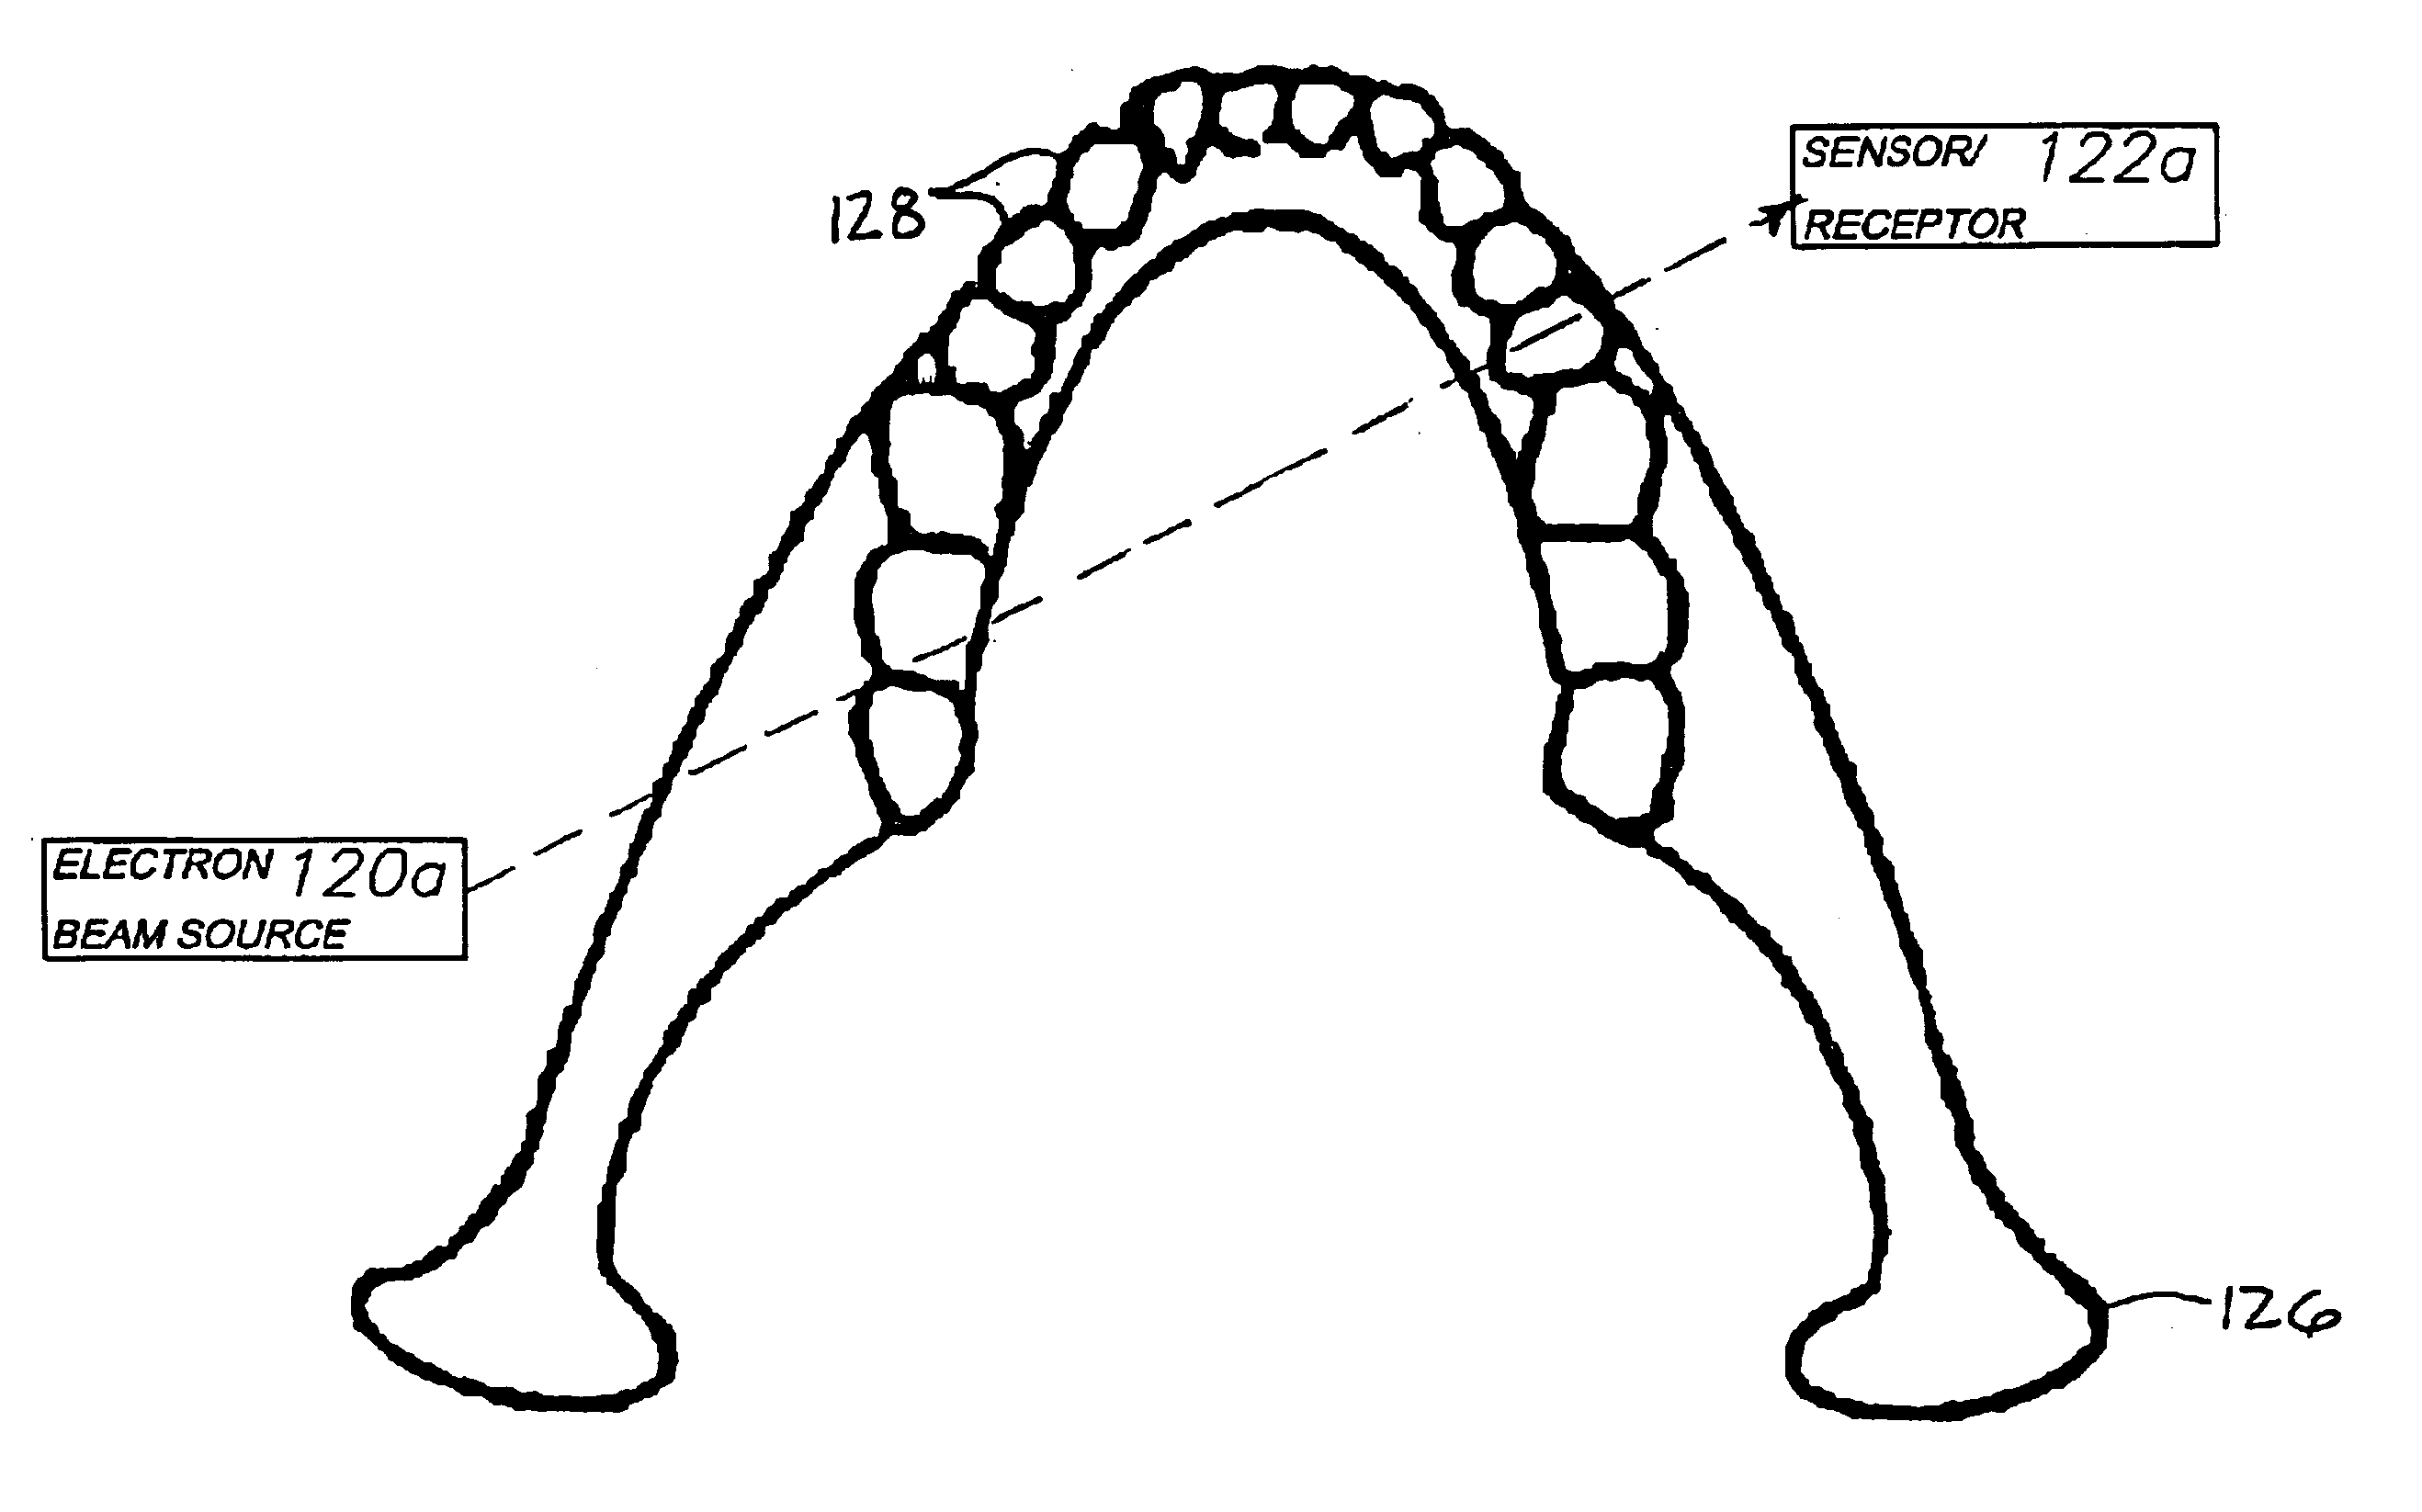 Dental and orthopedic densitometry modeling system and method